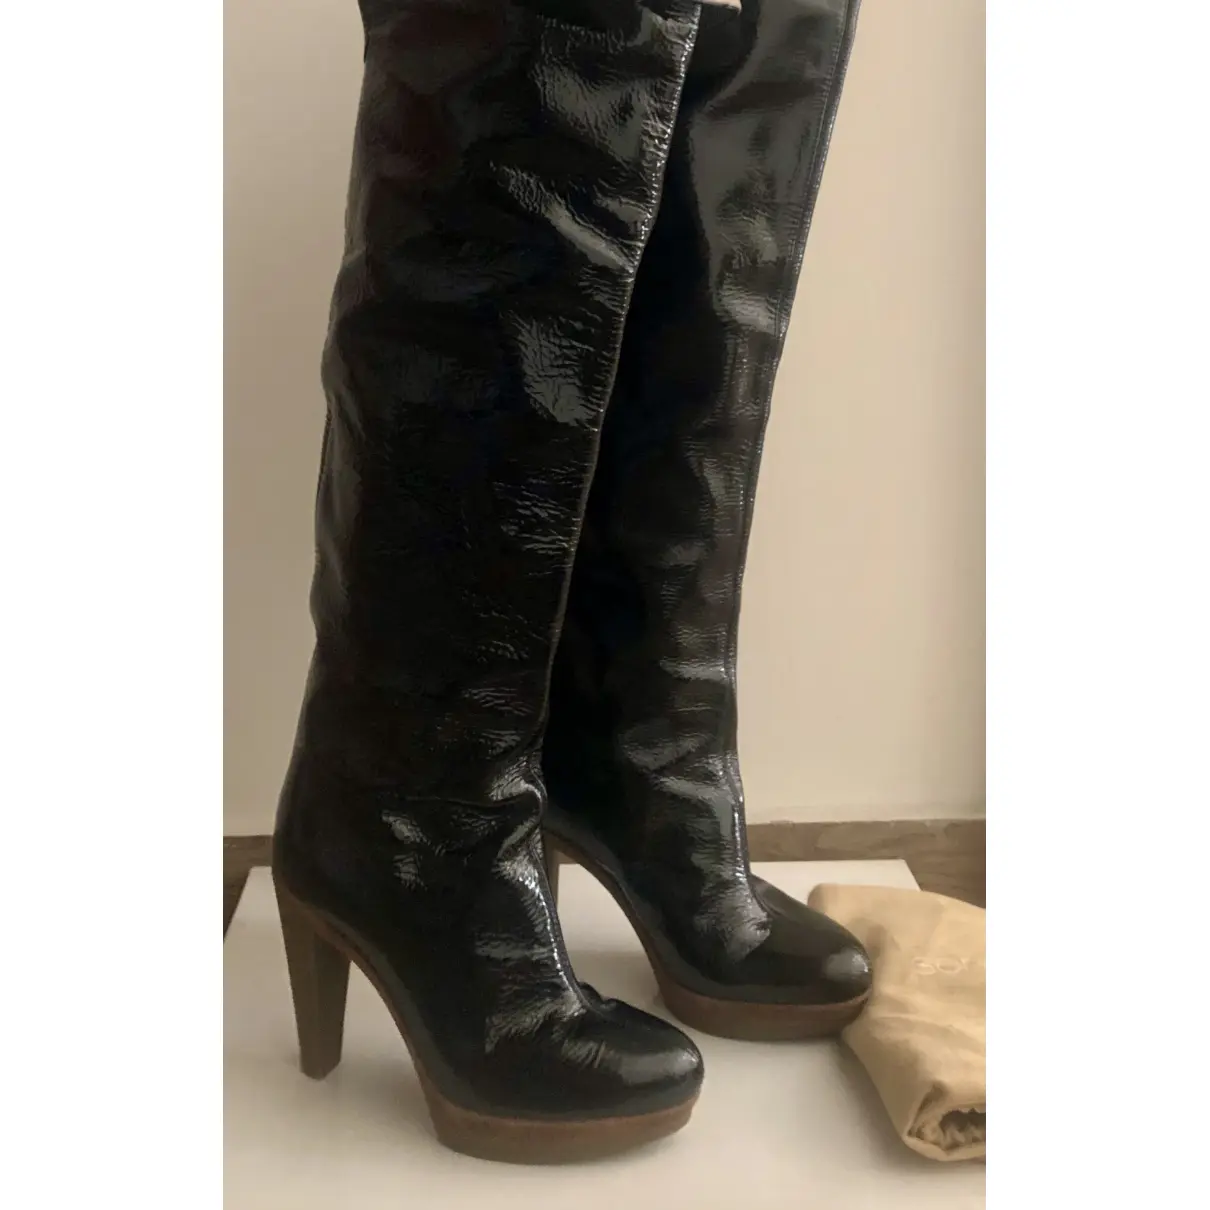 Buy Sergio Rossi Patent leather boots online